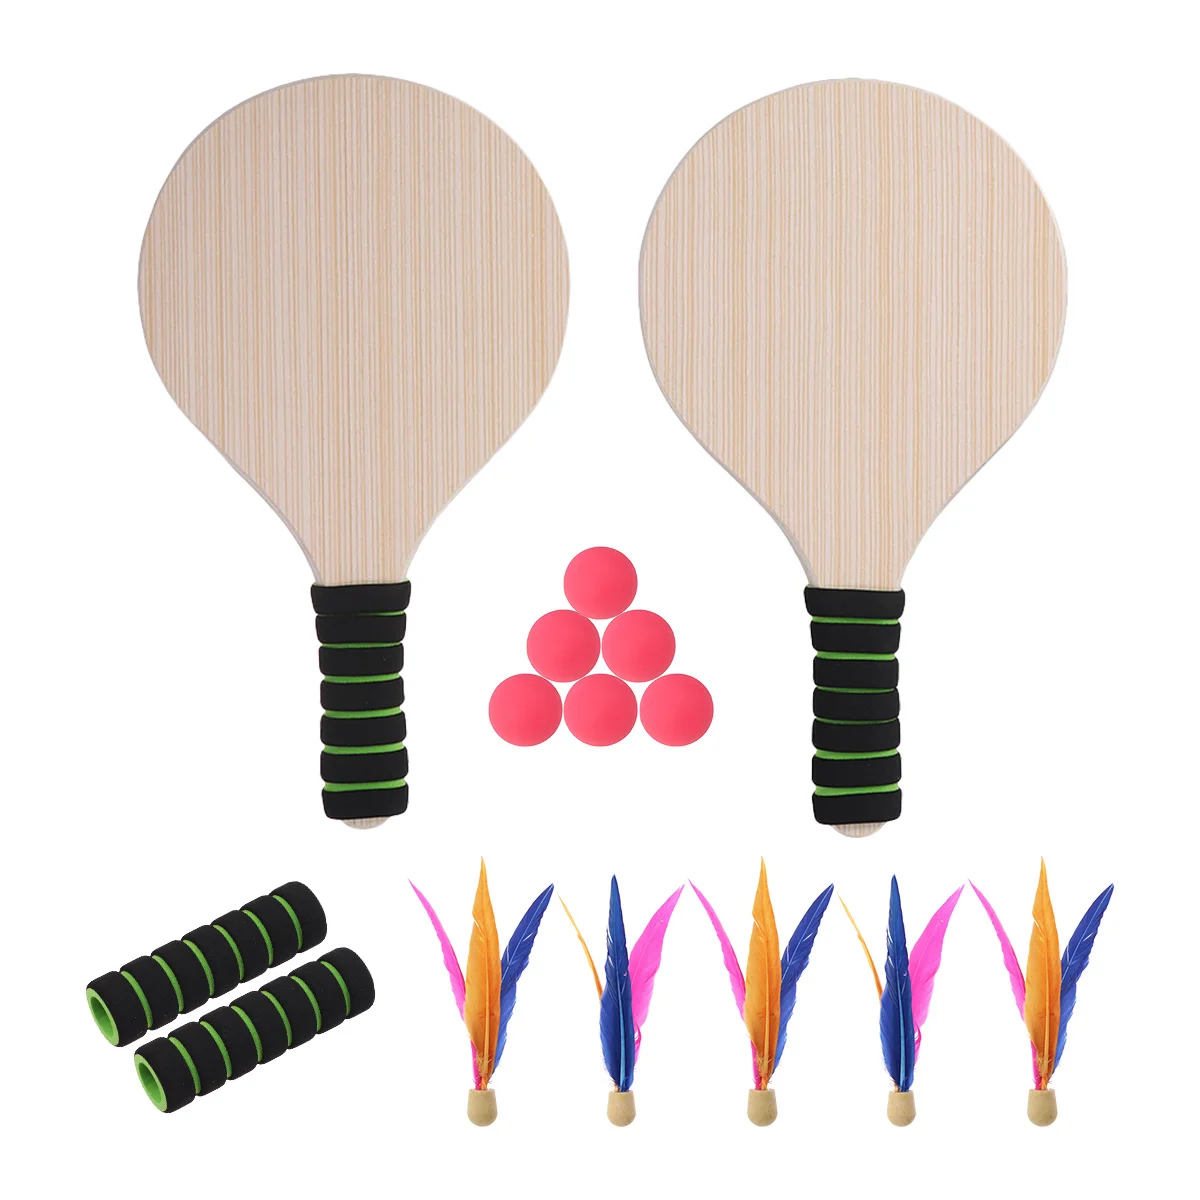 Paddle Type Badminton Rackets Wooden Cricket Paddles Beach Sand Team Games Toys 